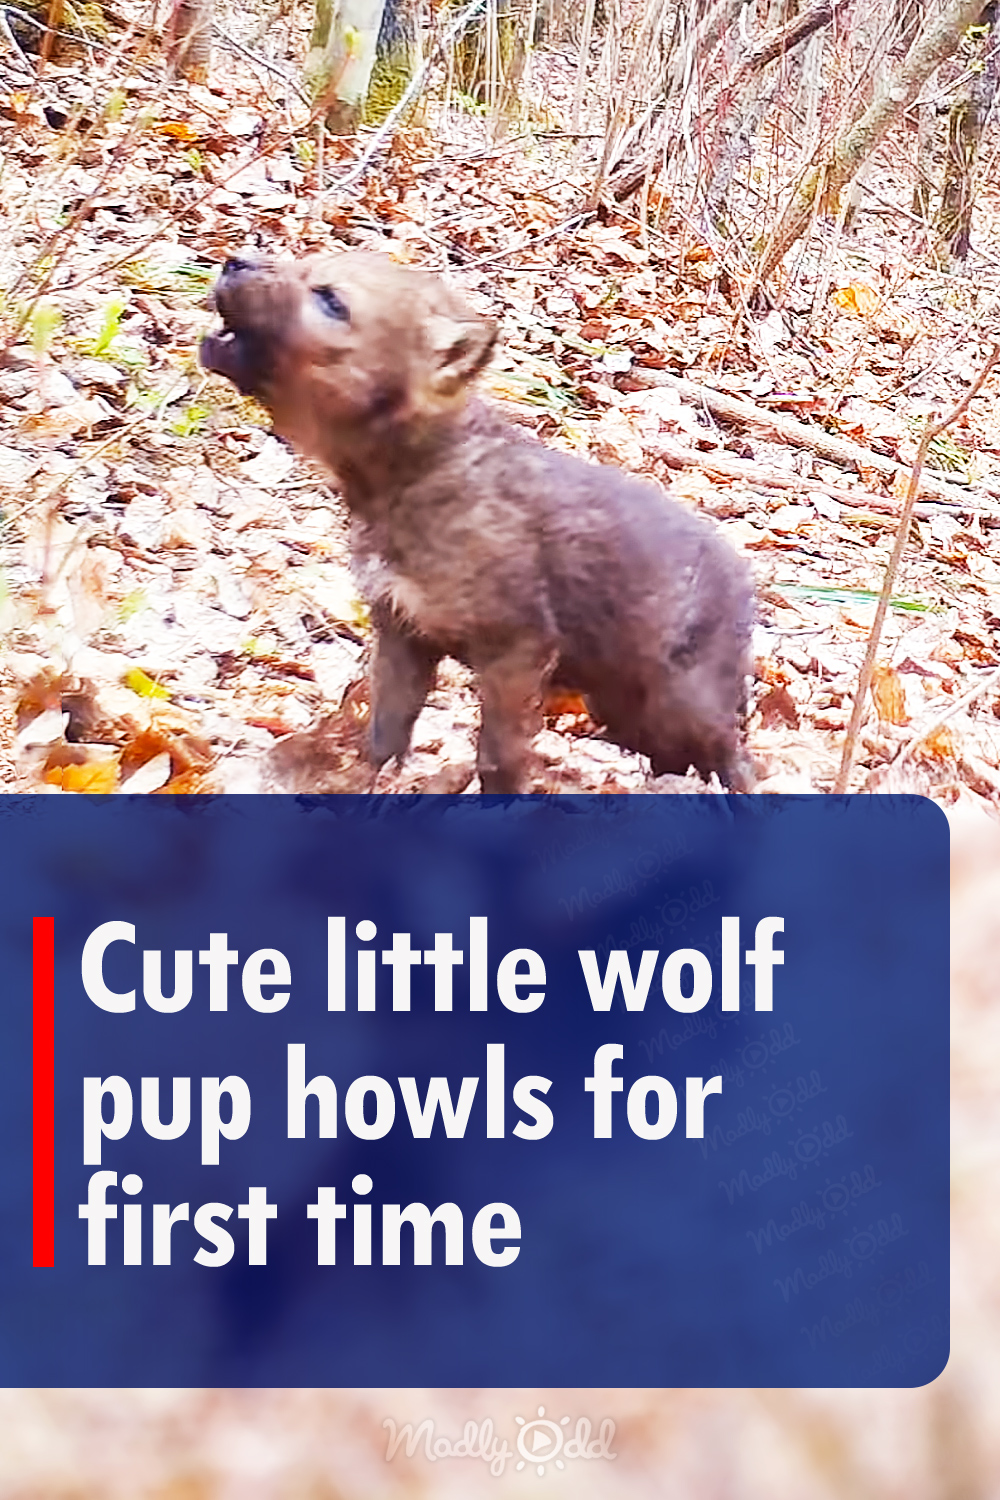 Cute little wolf pup howls for first time